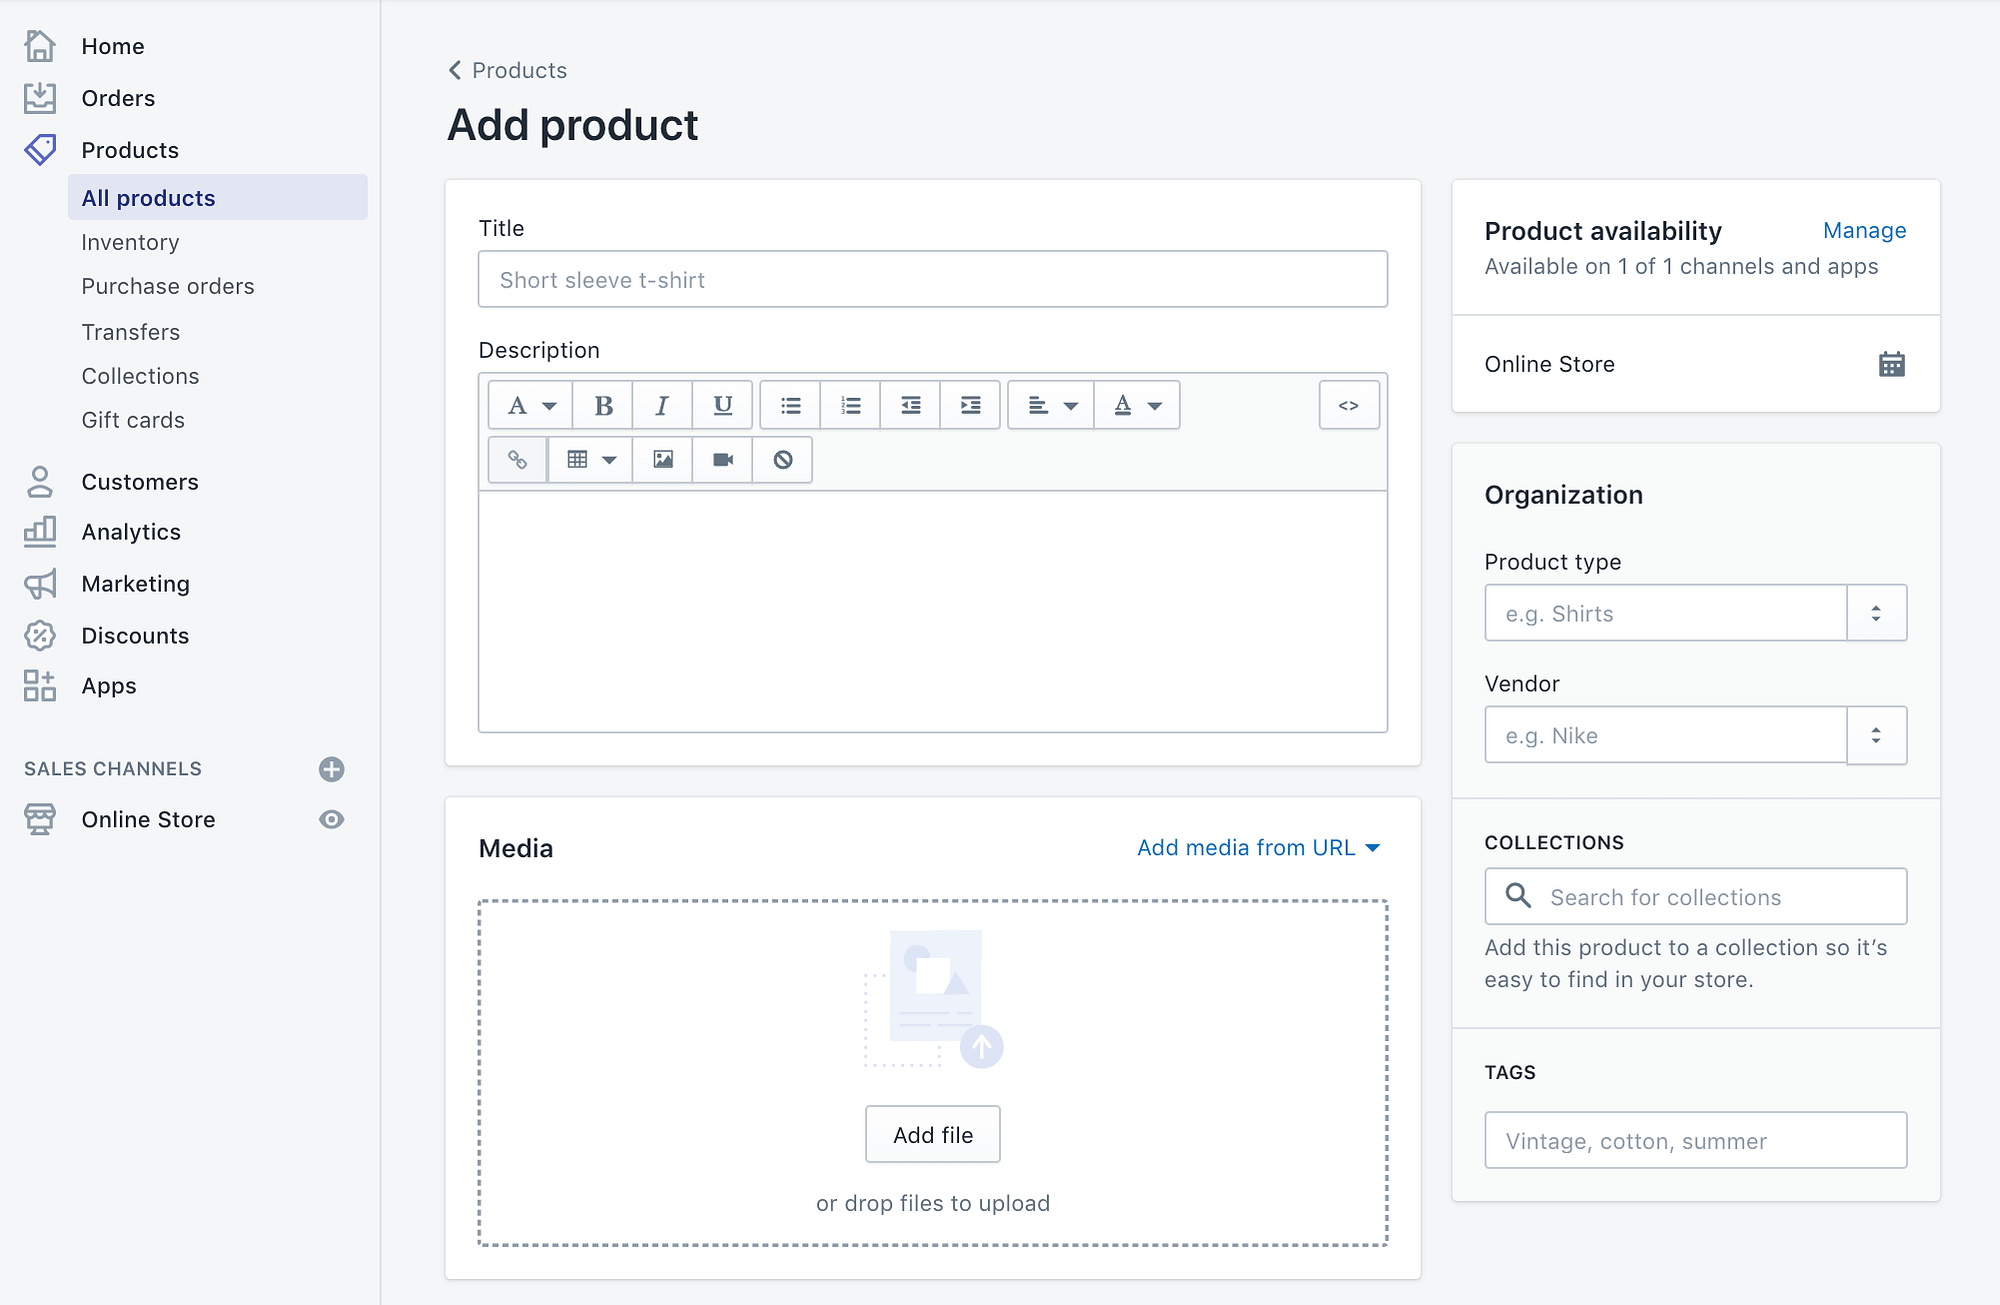 Adding a new product in Shopify